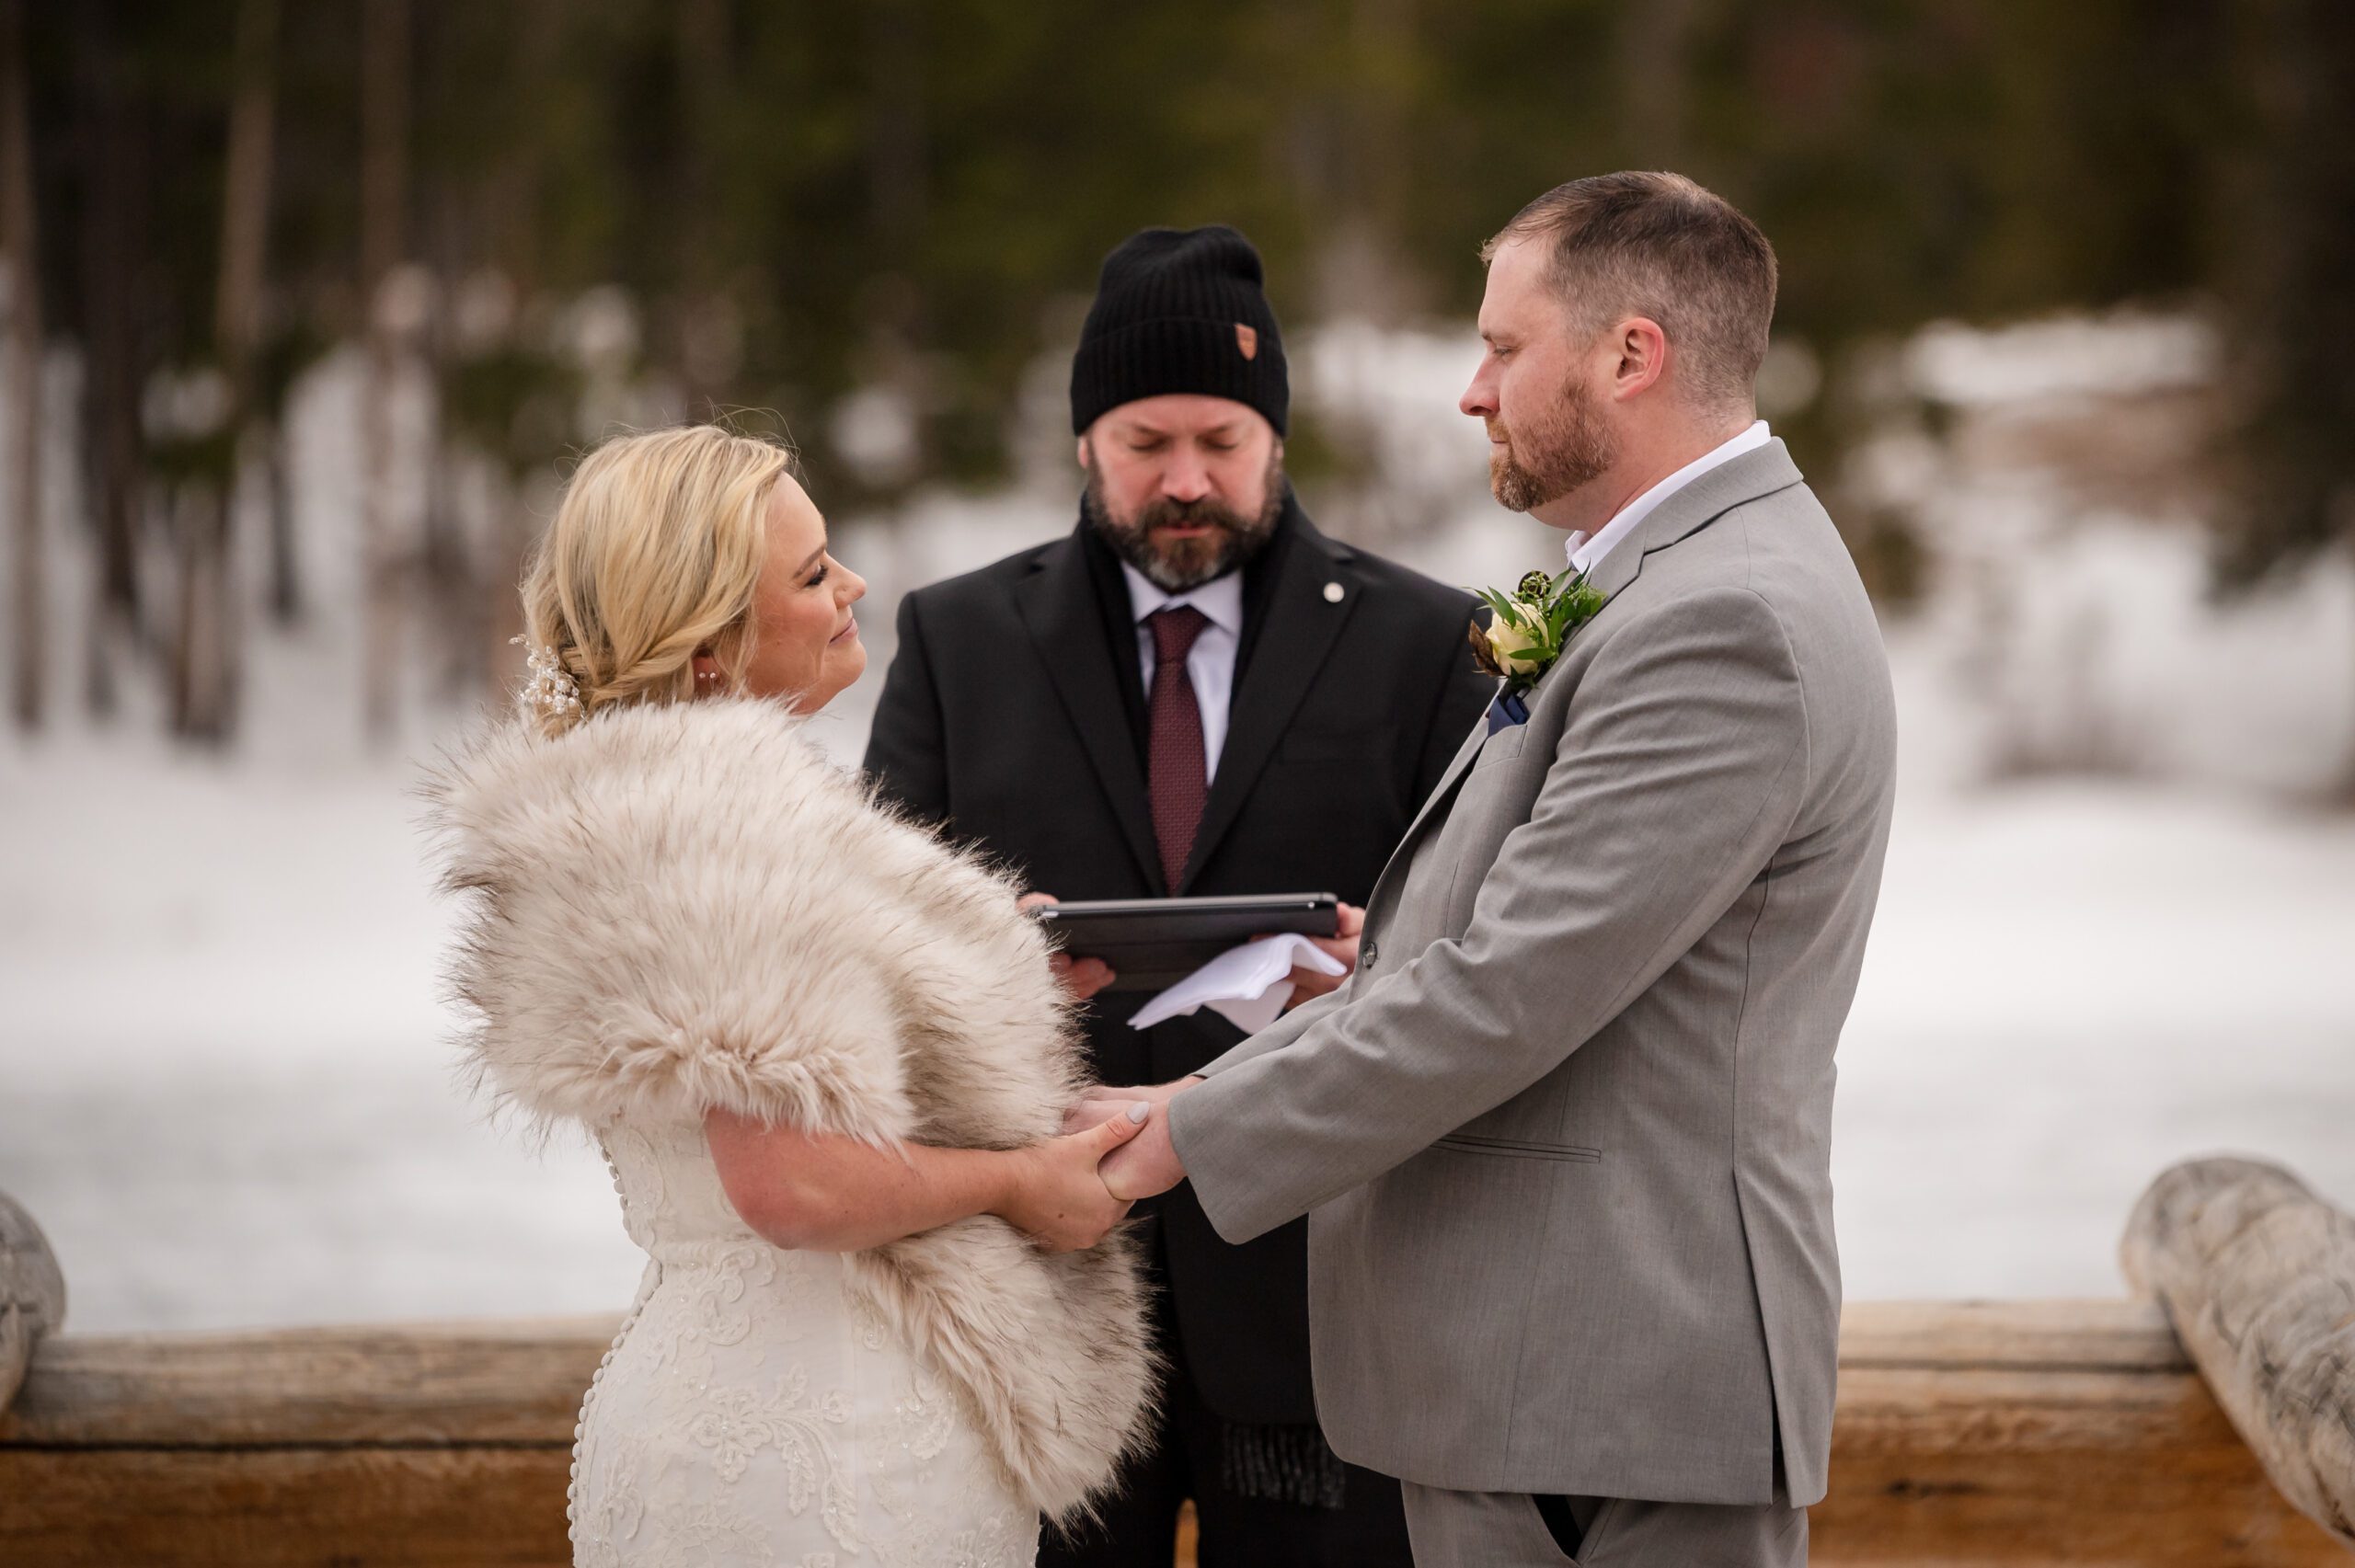 the bride and groom holding hands during their ceremony at their Winter Elopement at Sprague Lake.